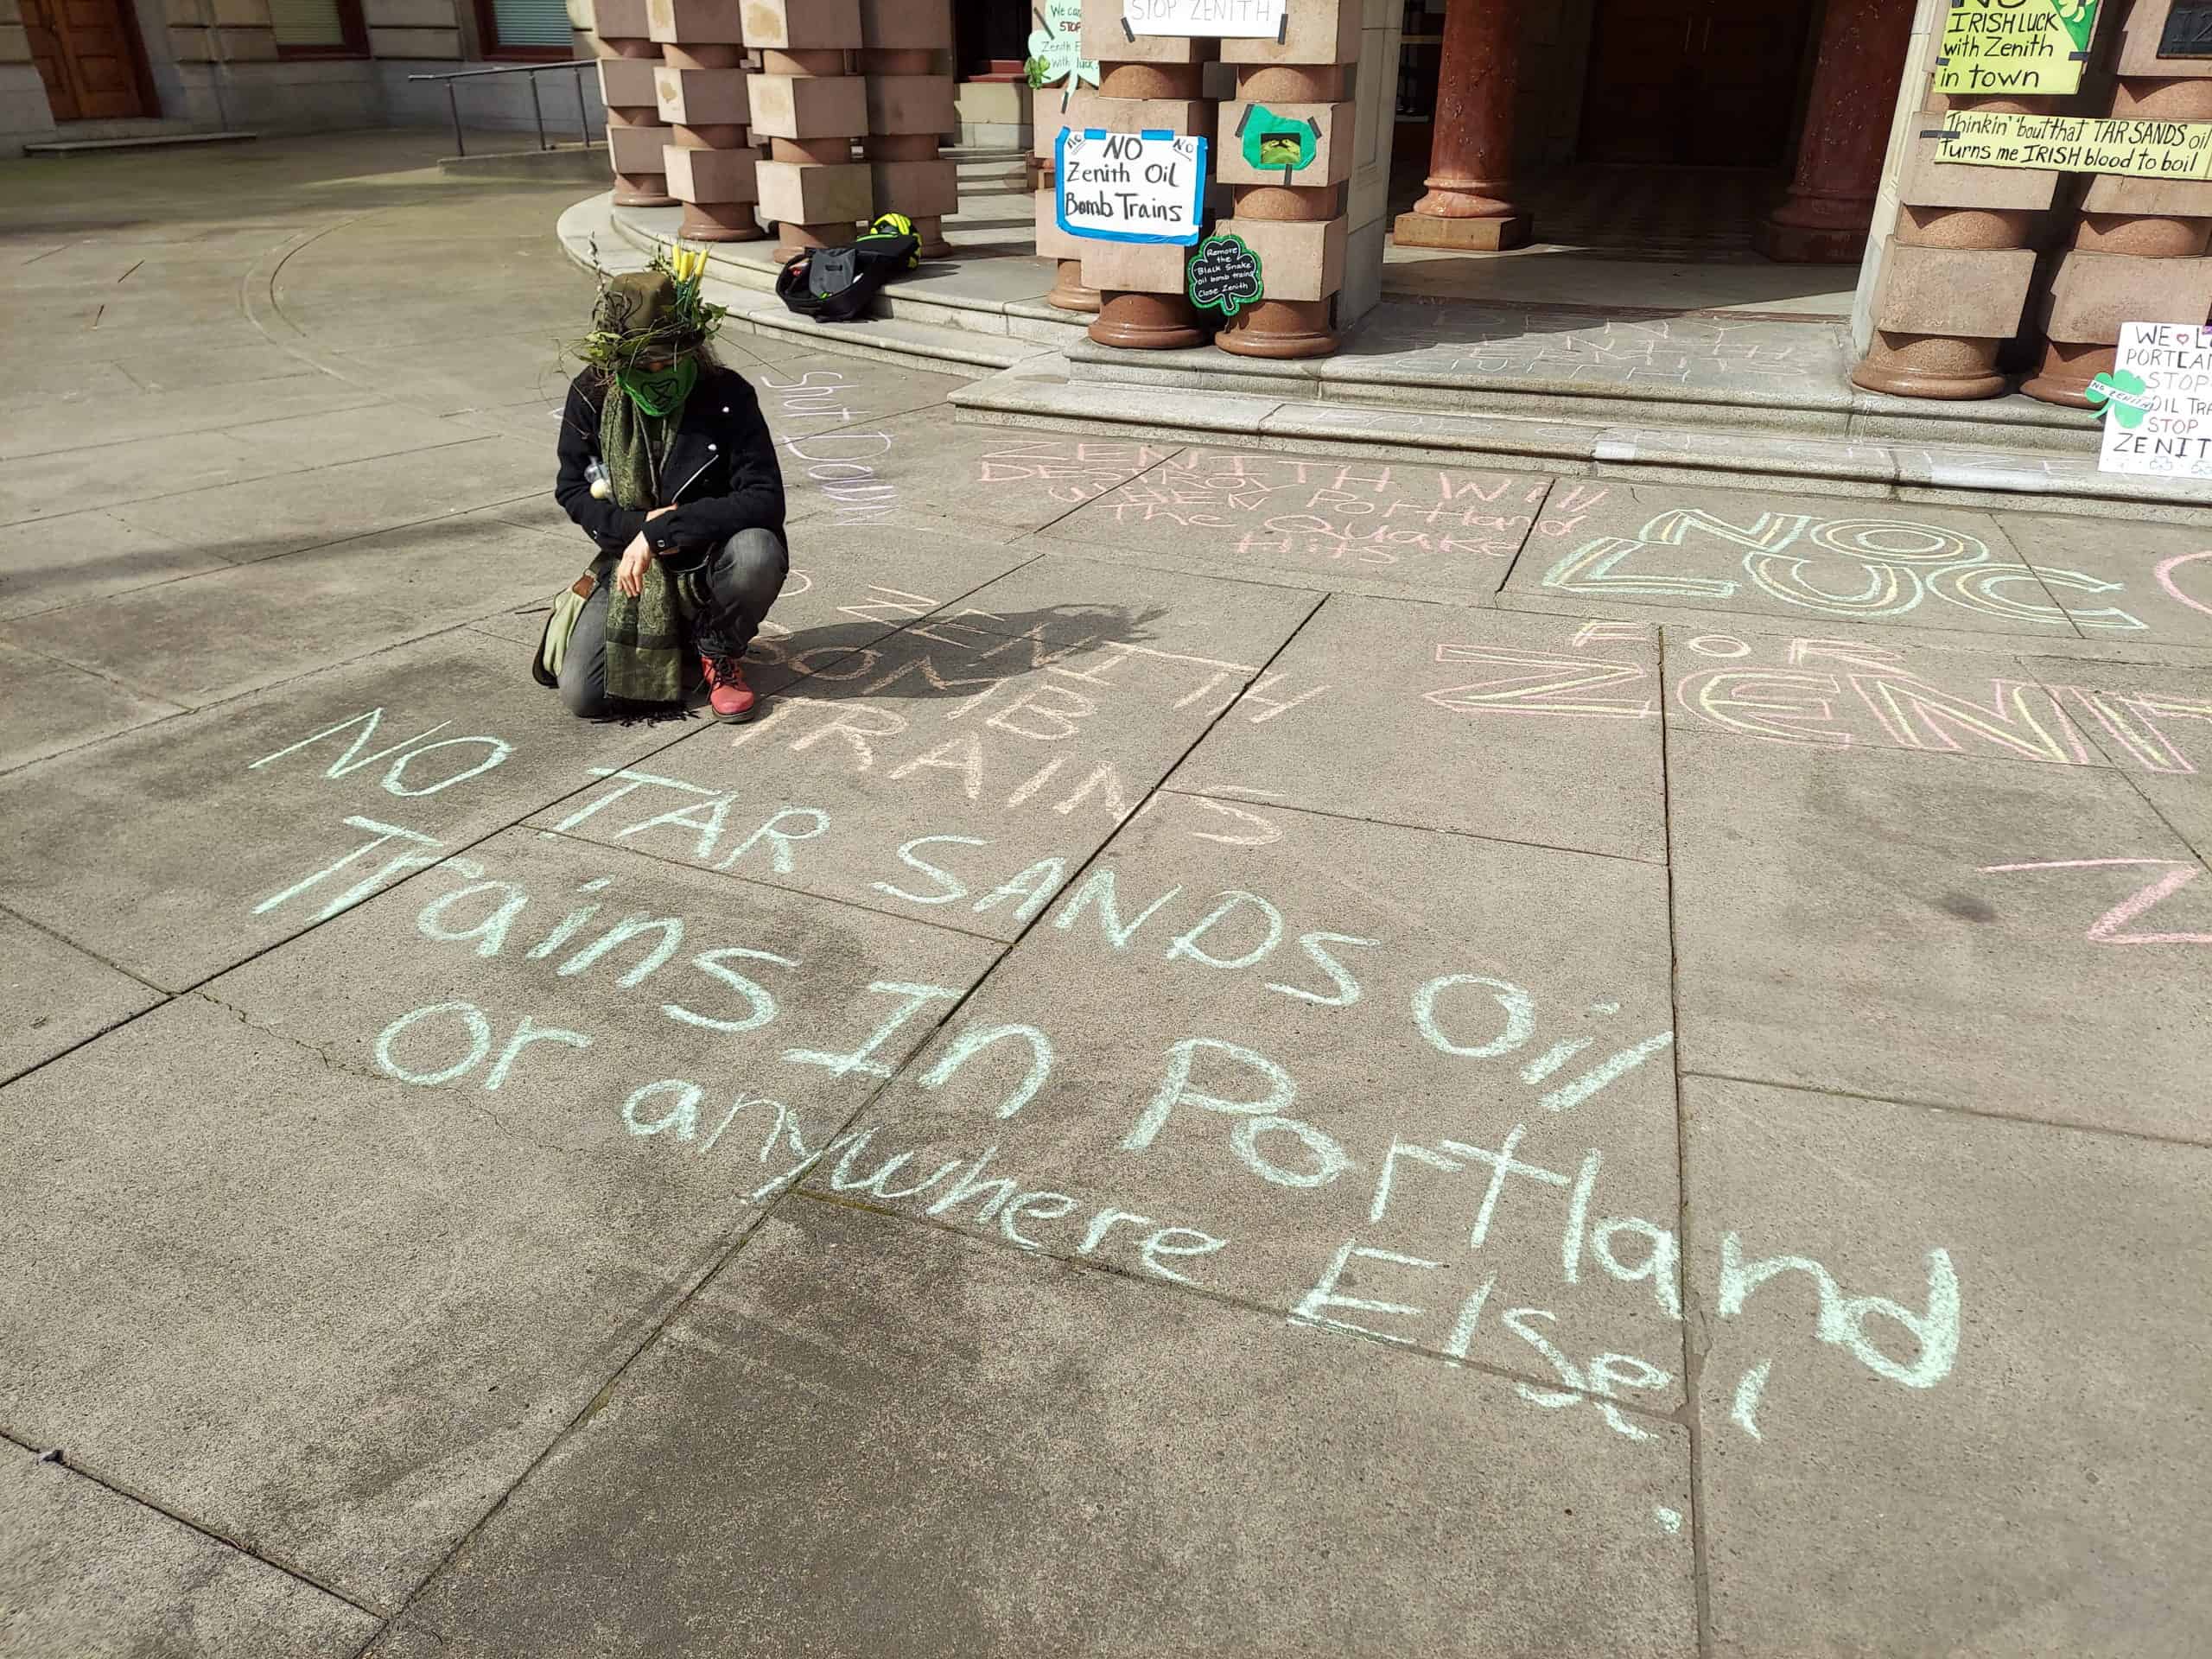 Outside of Portland City Hall, a member of XRPDX wearing all manners of flowers kneels next to messages written in colorful chalk: "NO ZENITH BOMB TRAINS" and "NO TAR SANDS Oil Trains In Portland or anywhere Else!"